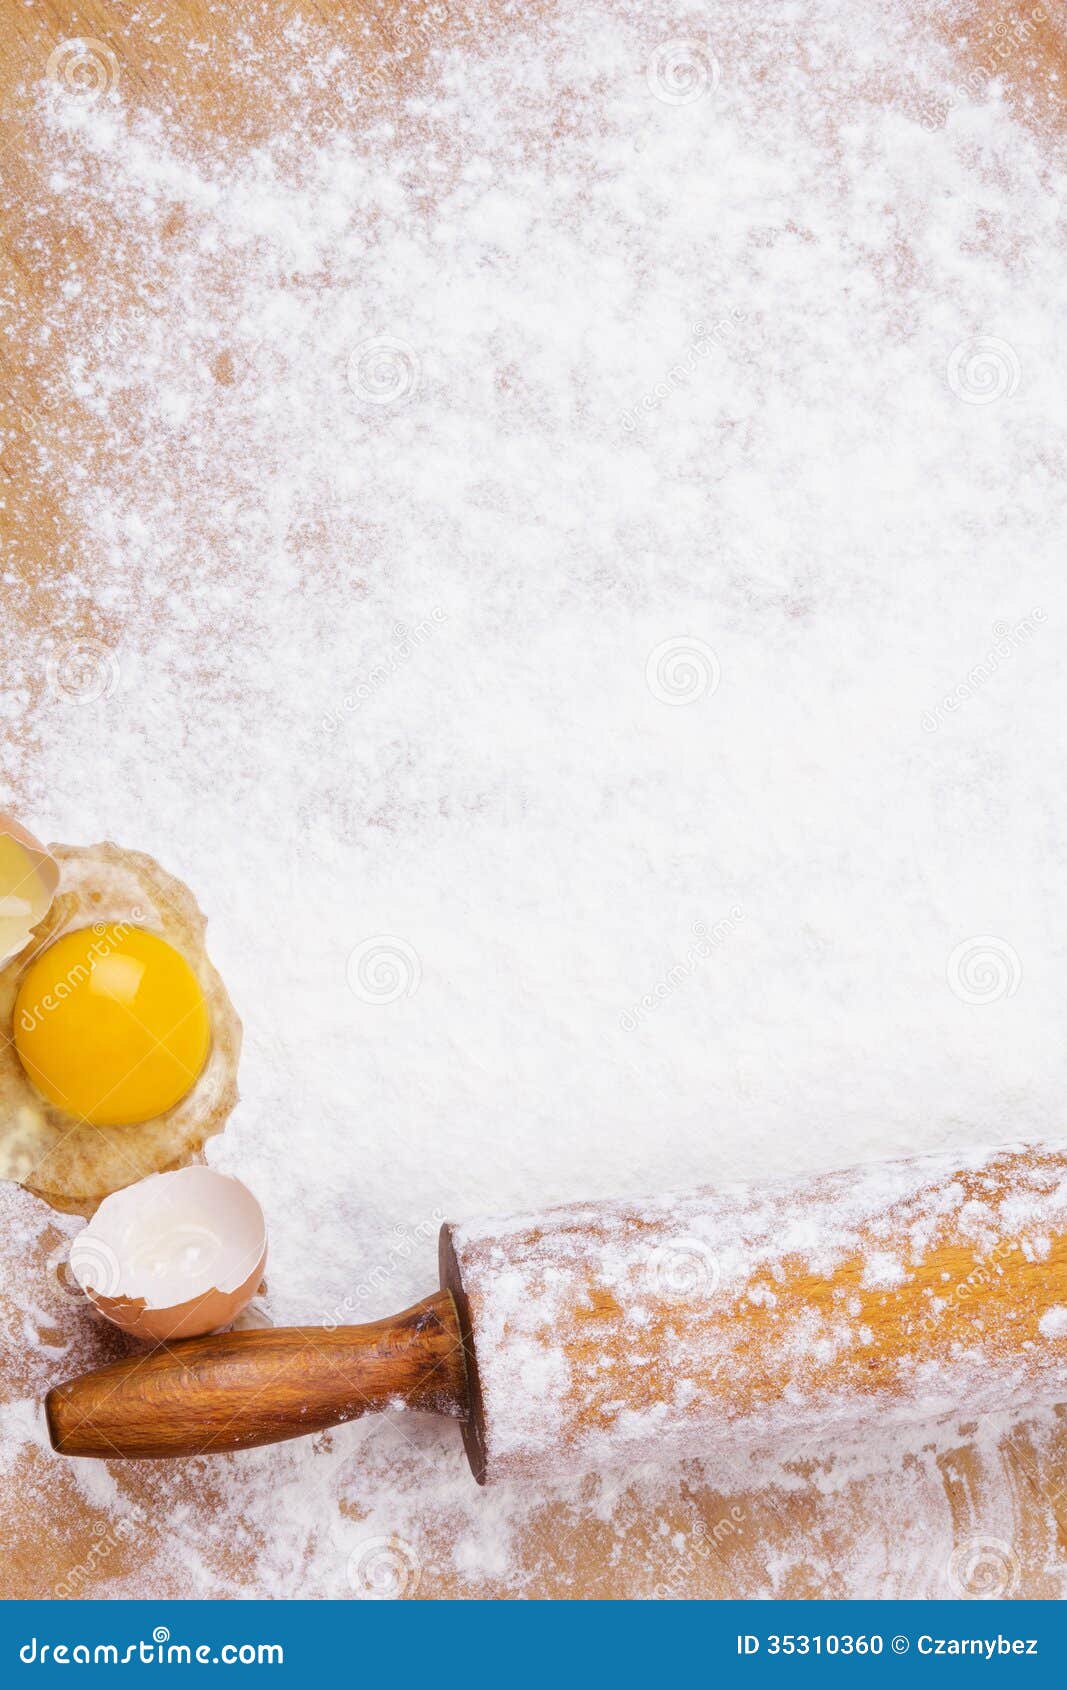 Baking background stock photo. Image of board, rolling